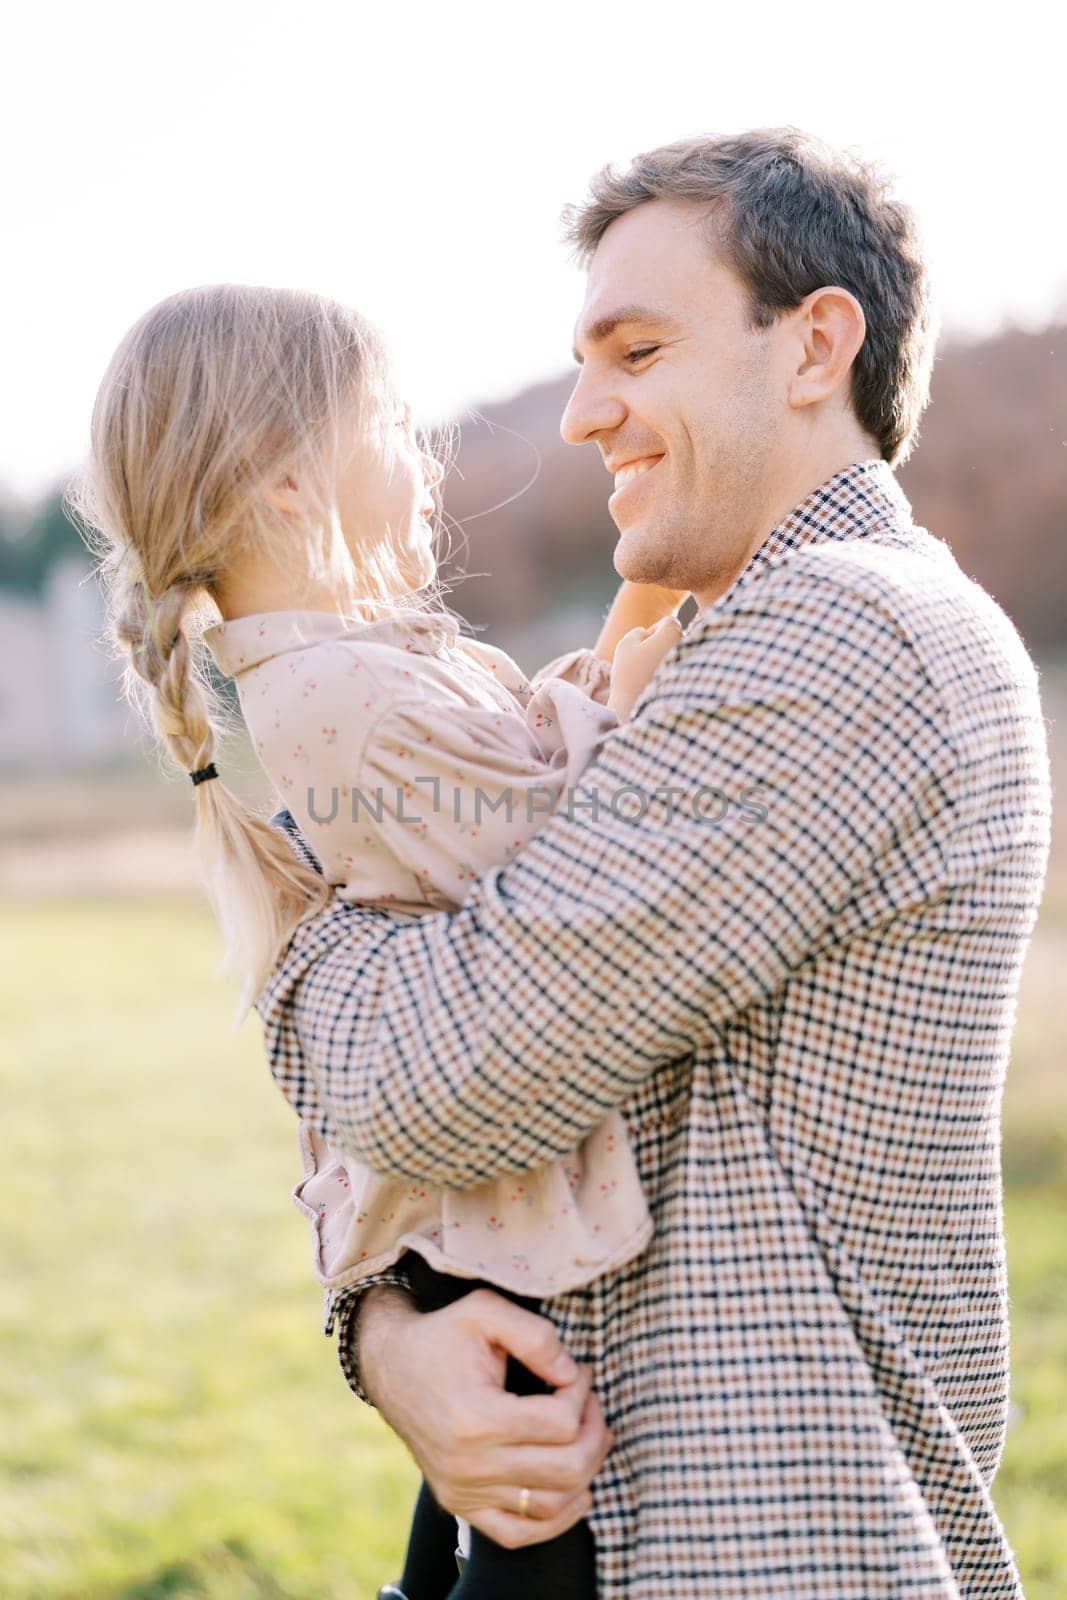 Smiling dad looking at little girl in his arms while standing on the lawn. High quality photo